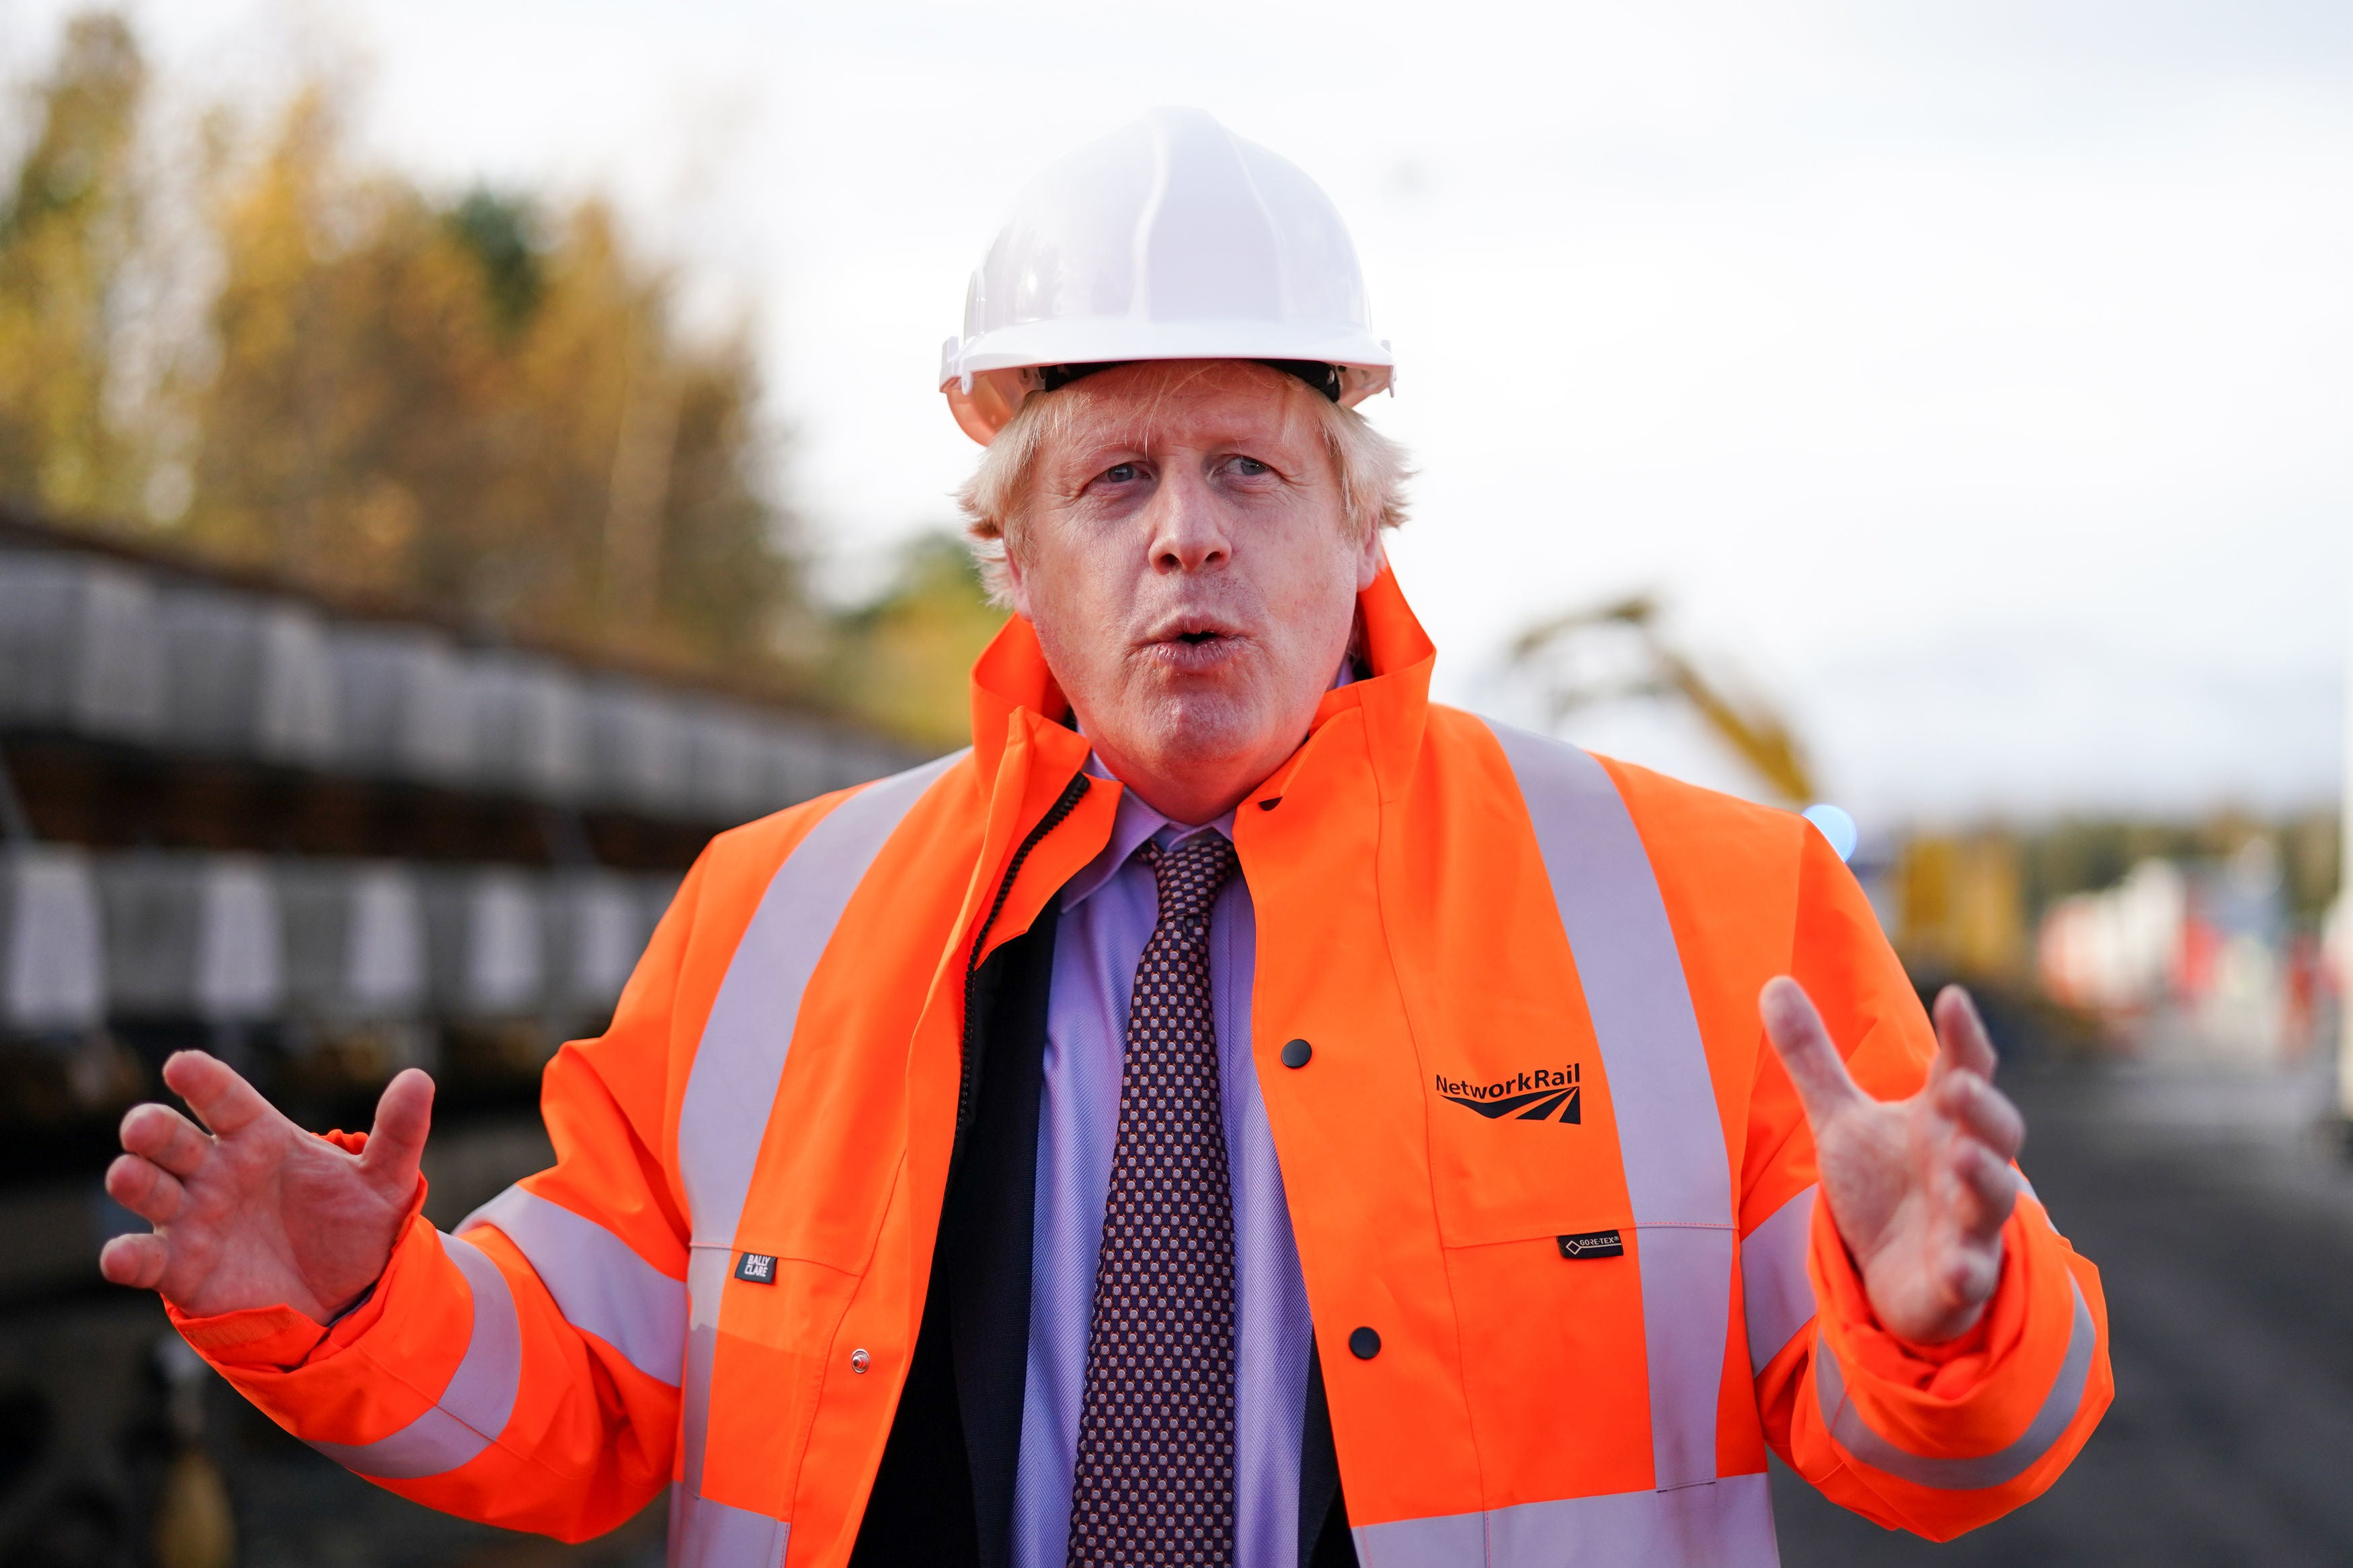 ‘Boris Johnson made a splash with his call for levelling up’